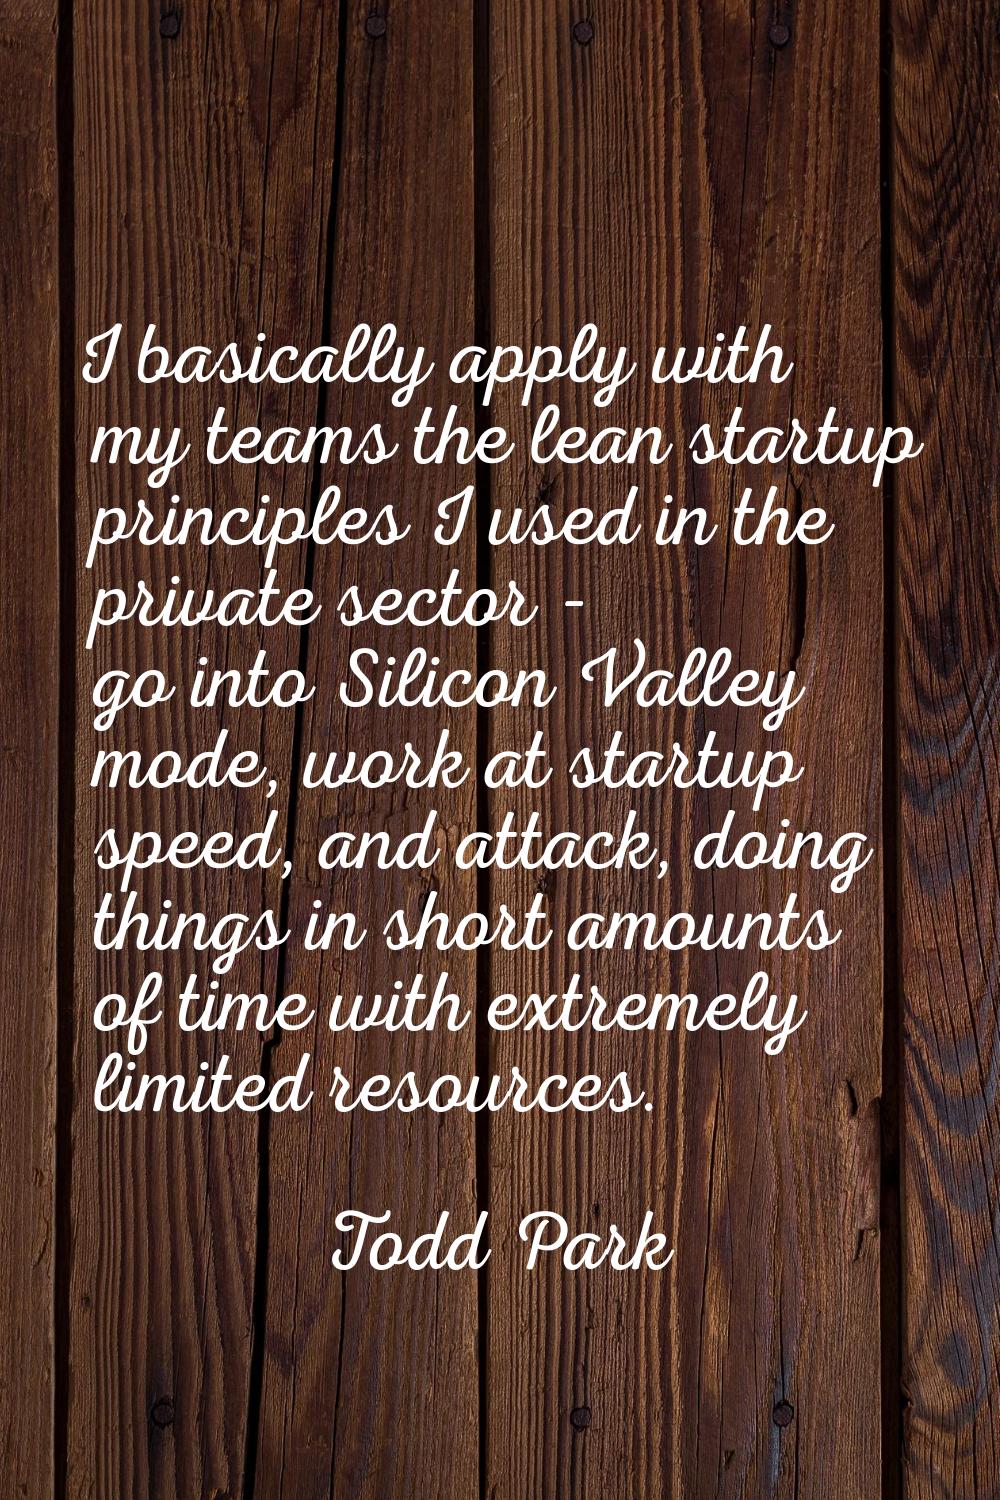 I basically apply with my teams the lean startup principles I used in the private sector - go into 